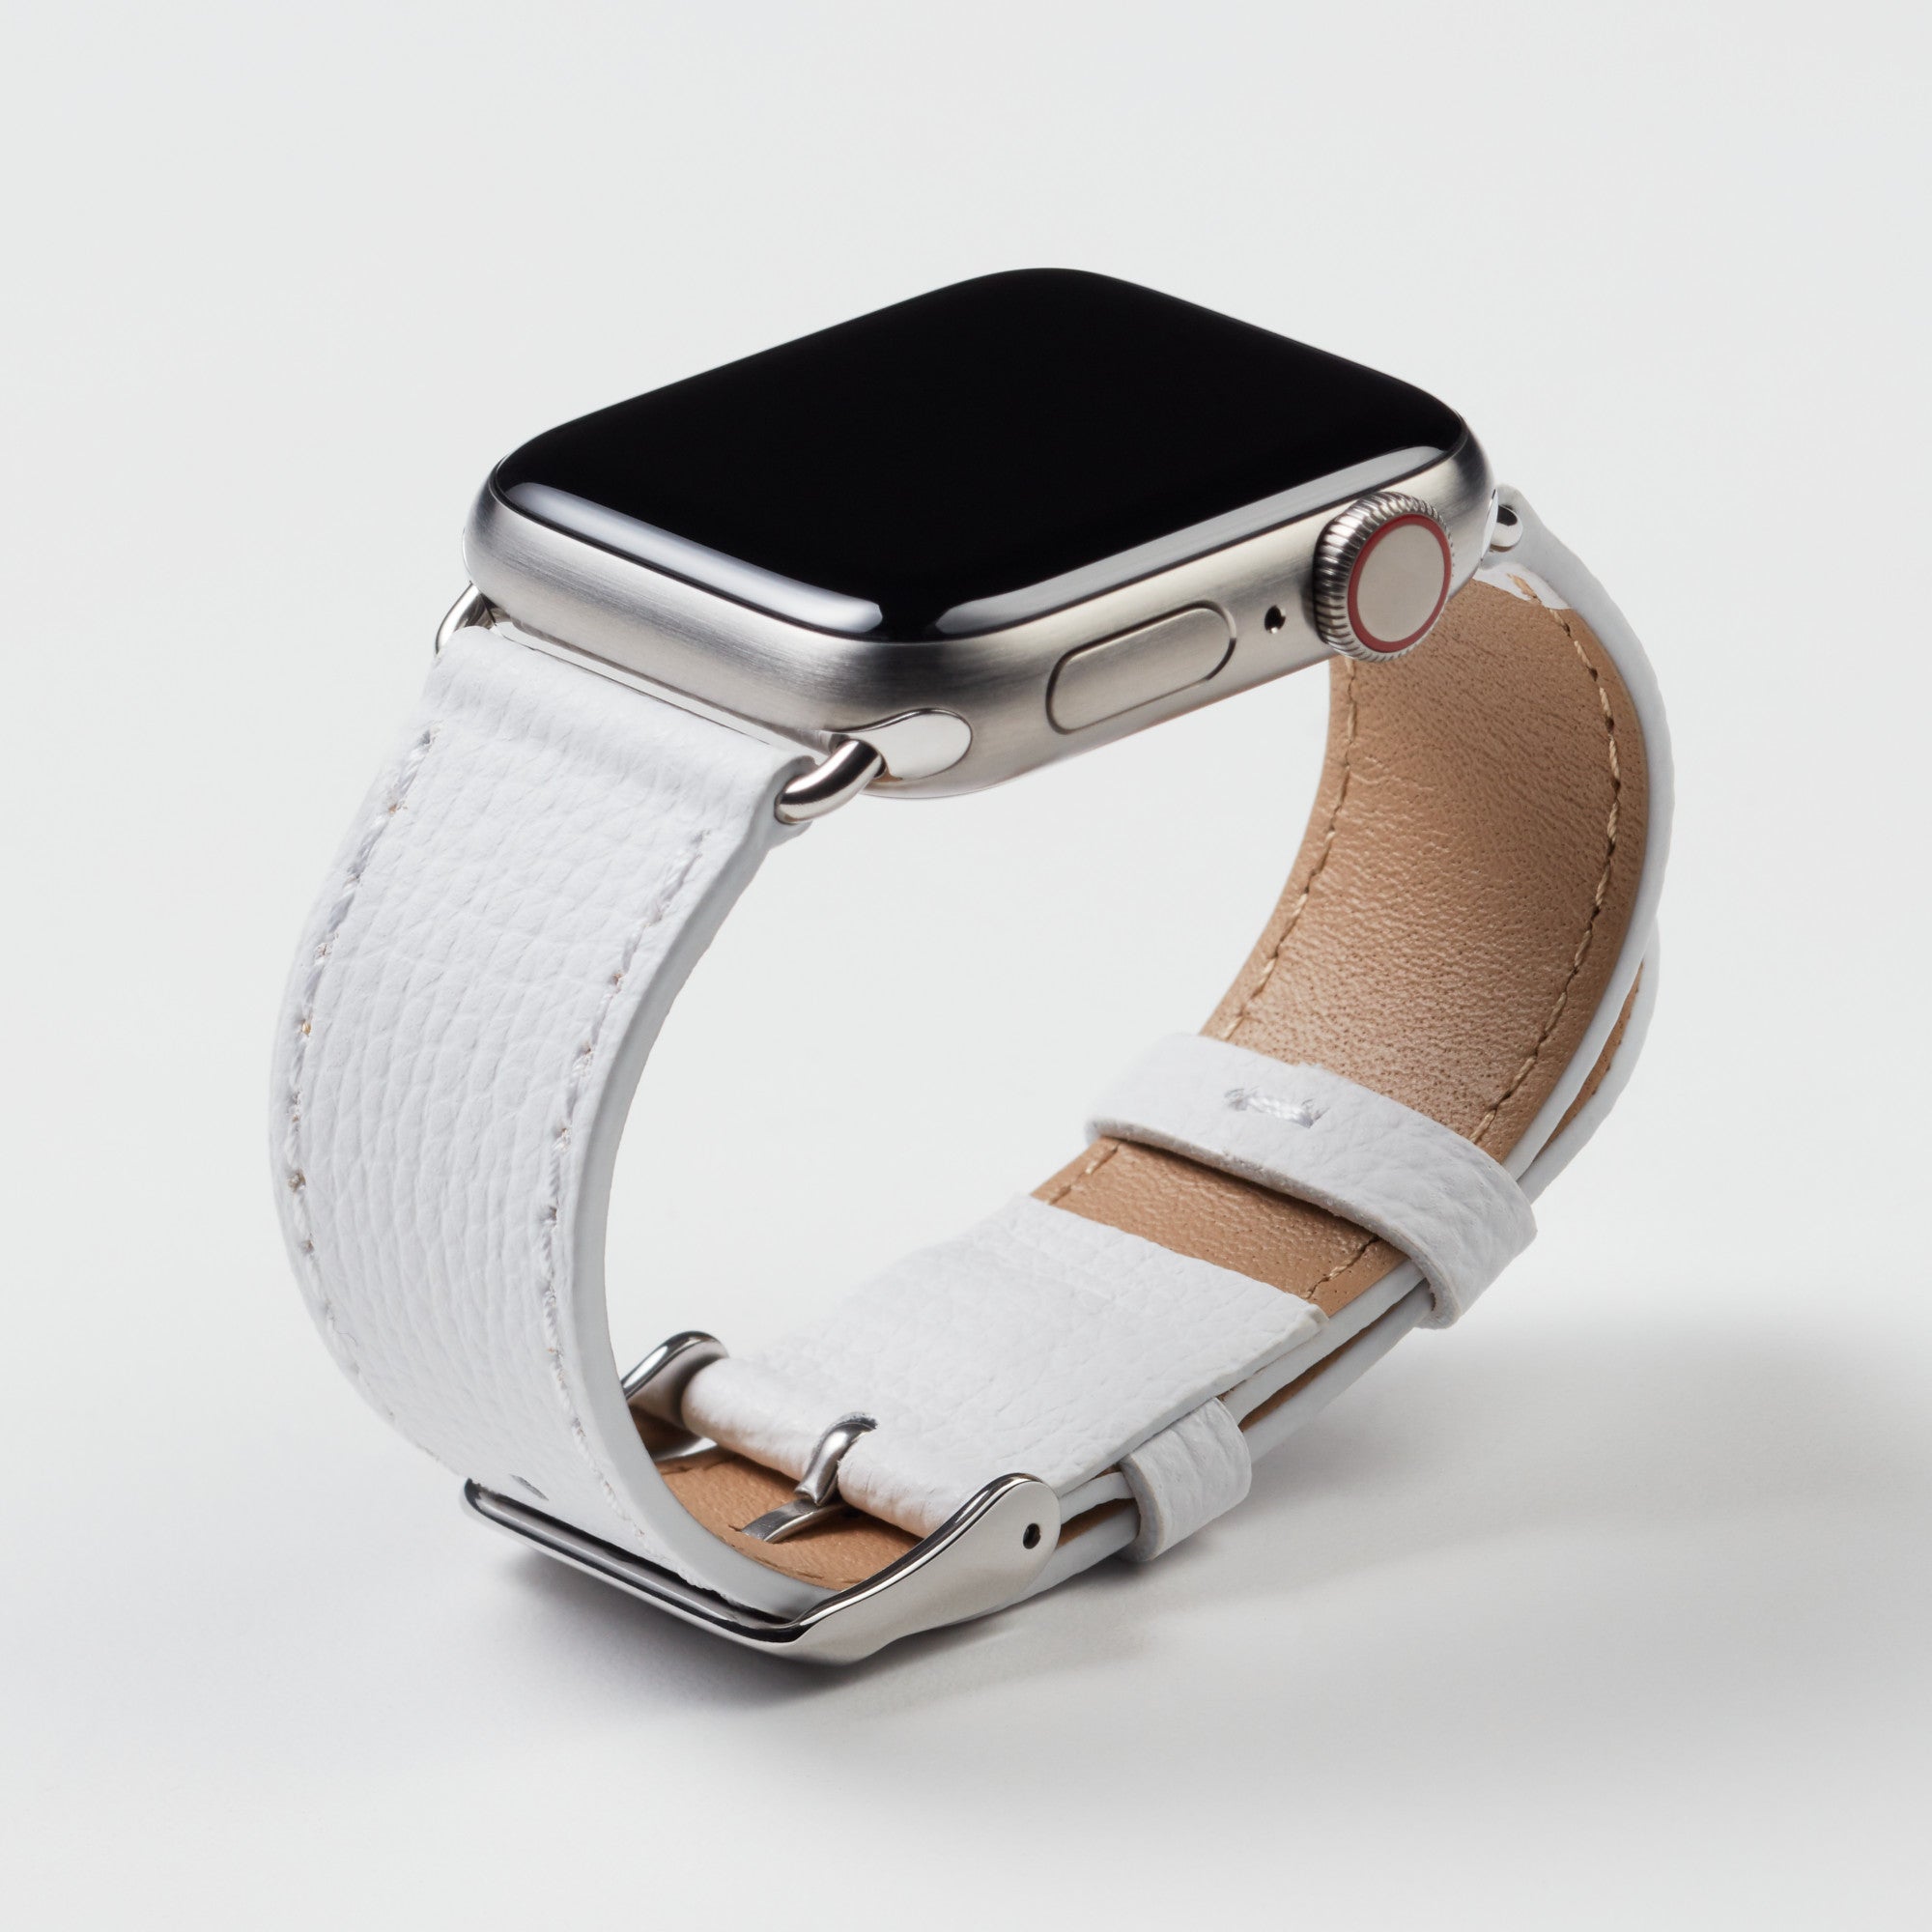 Pin and Buckle Apple Watch Bands - Epsom - Leather Apple Watch Band - Ivory White - Silver